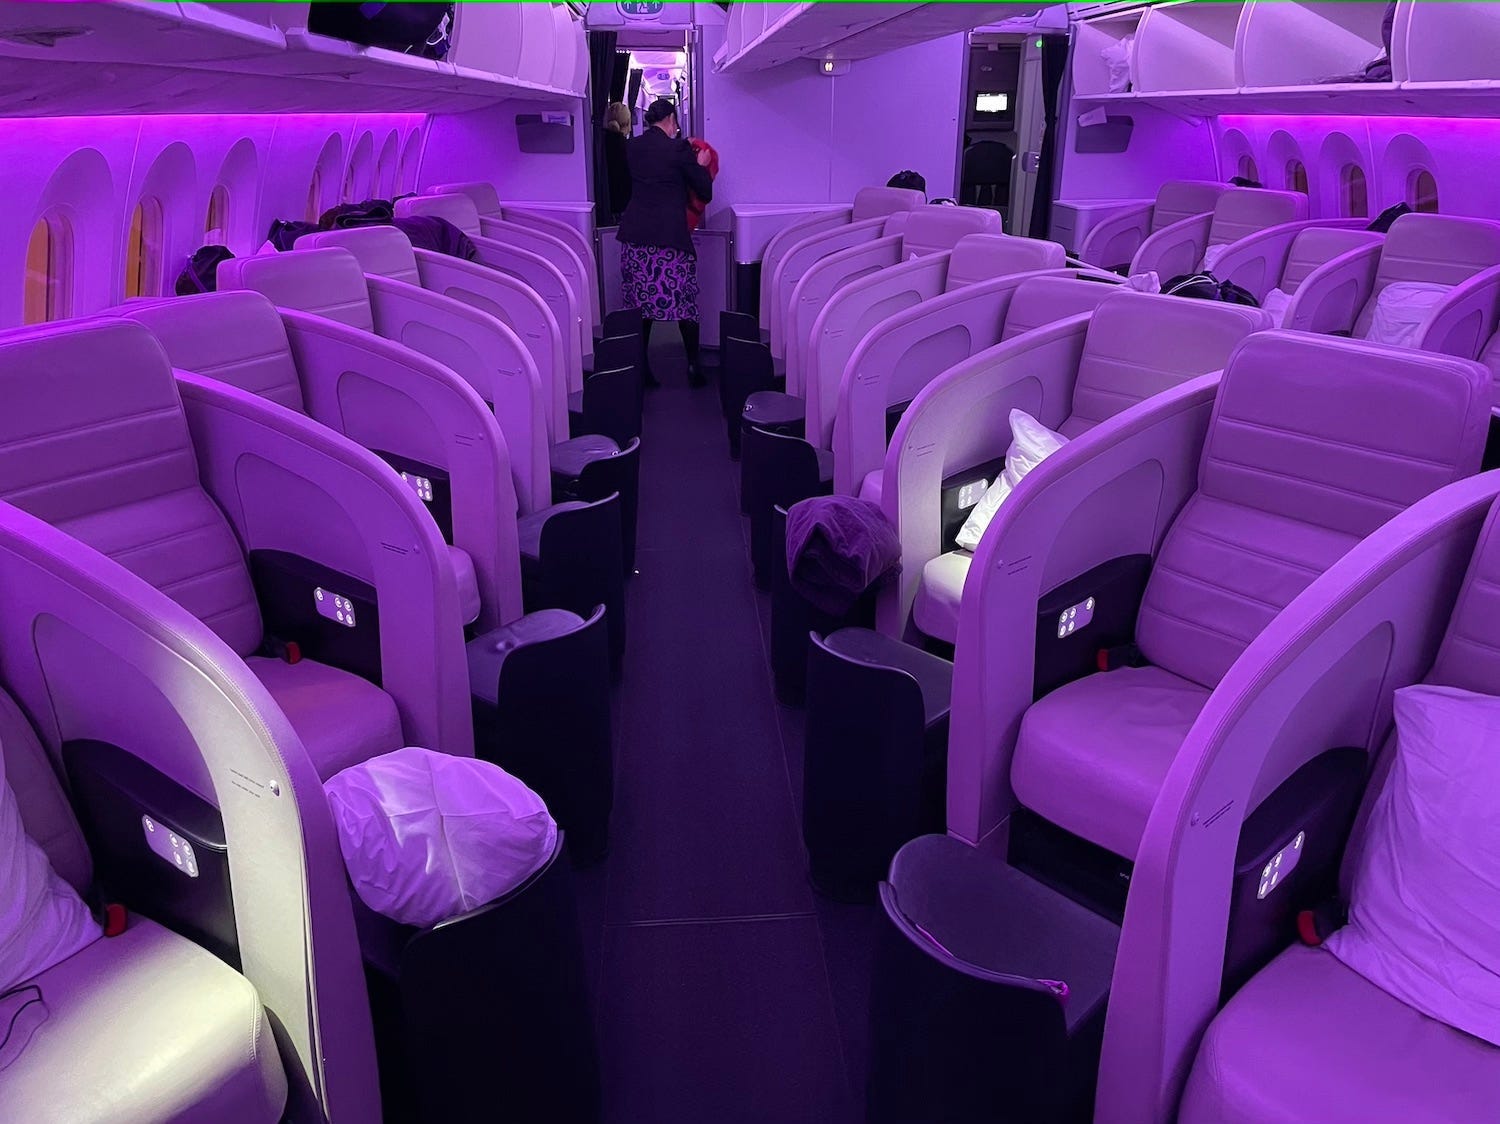 Overall, I thought the new first-class seats seemed more private compared to the current design. Today, business-class passengers have lie-flat beds that are angled toward the center of the plane.